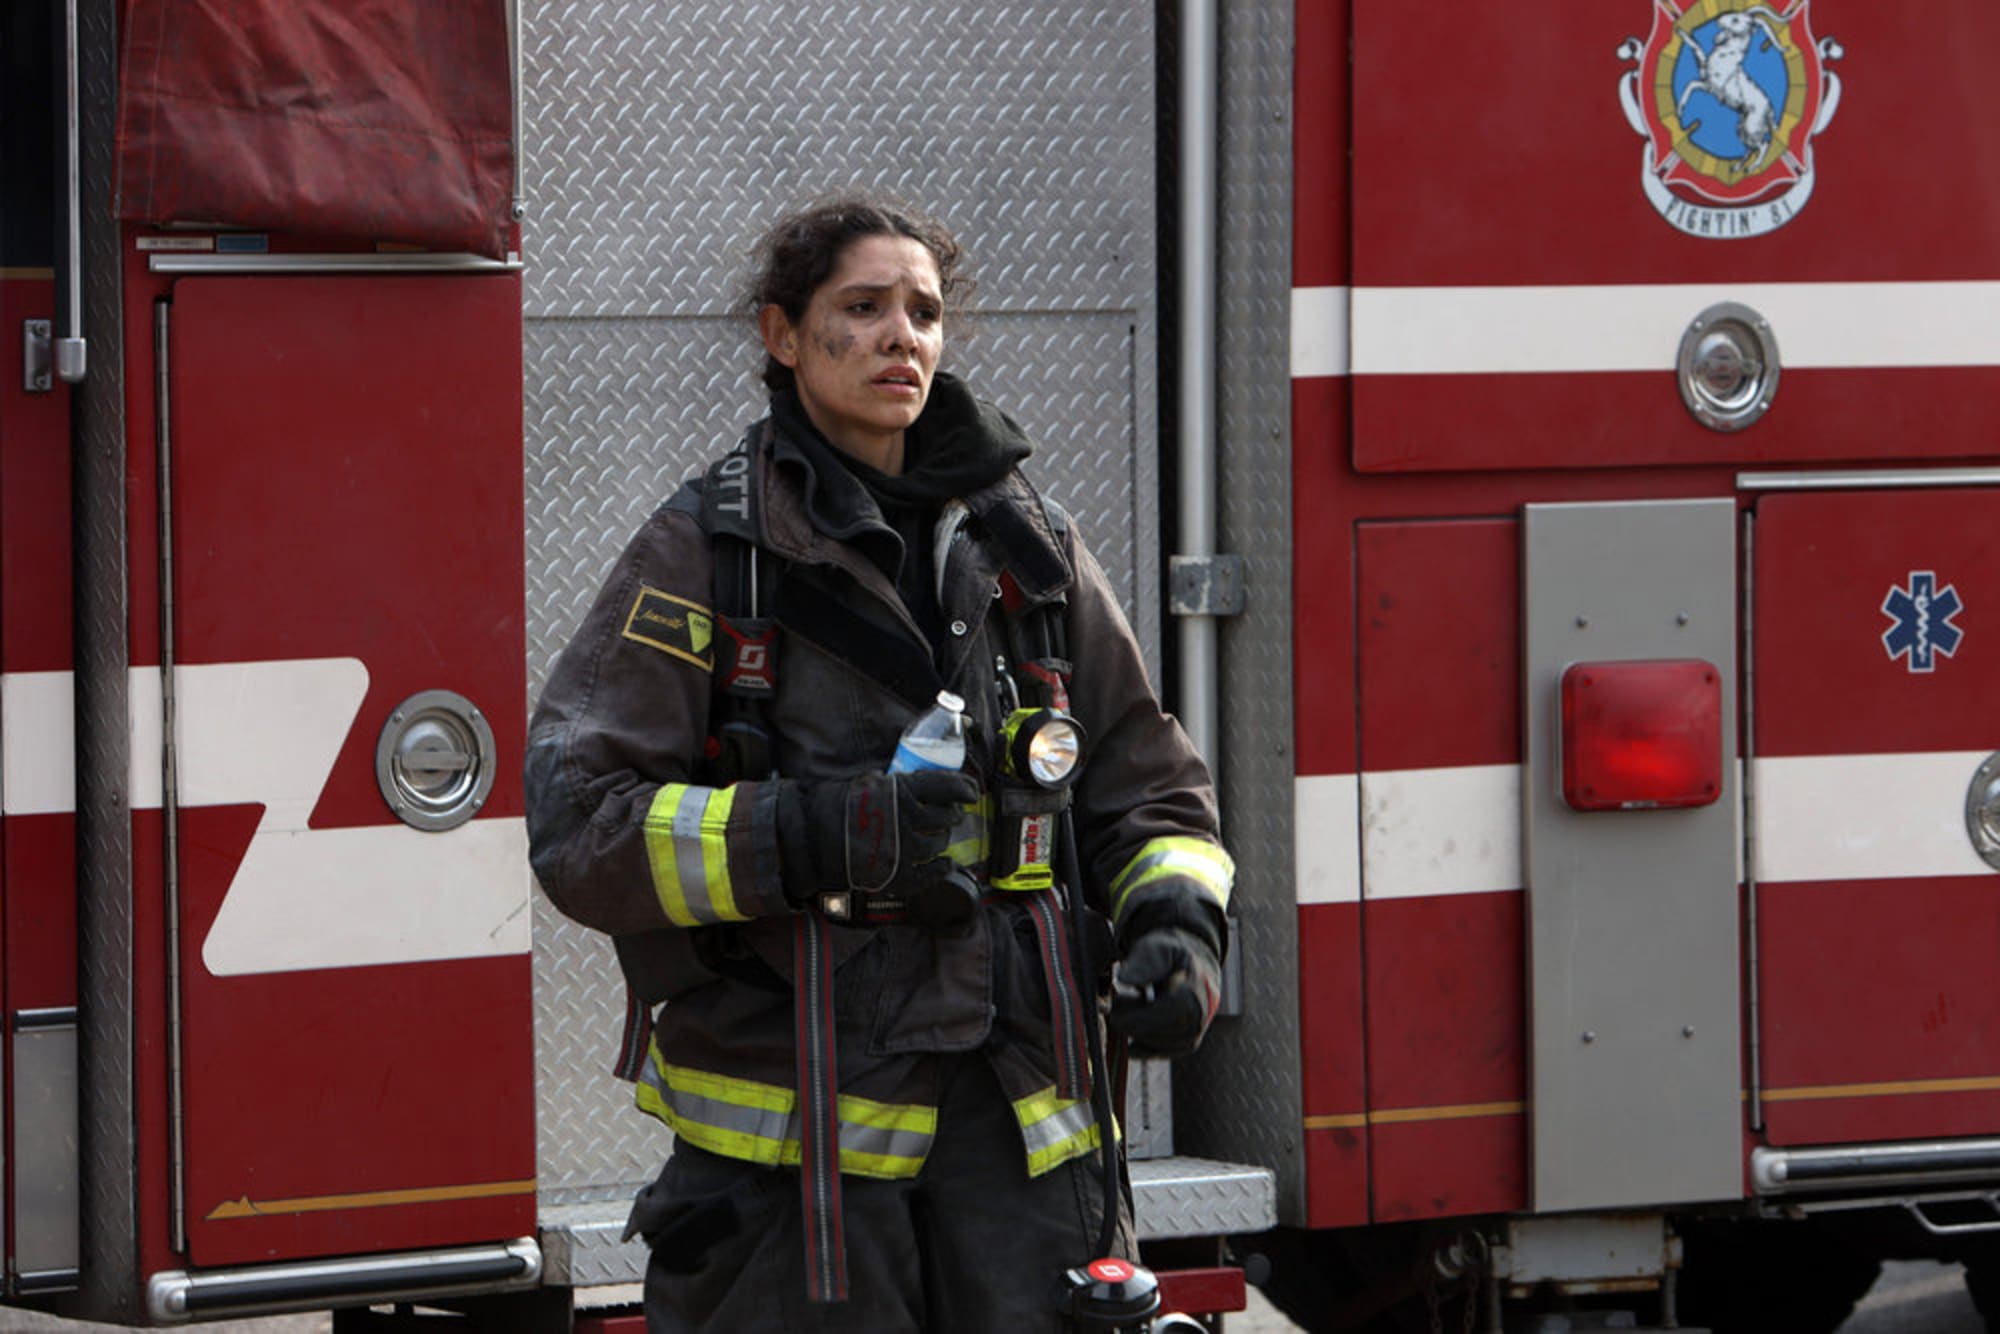 Chicago Fire Season 9 Episode 7: Release Date and Preview.